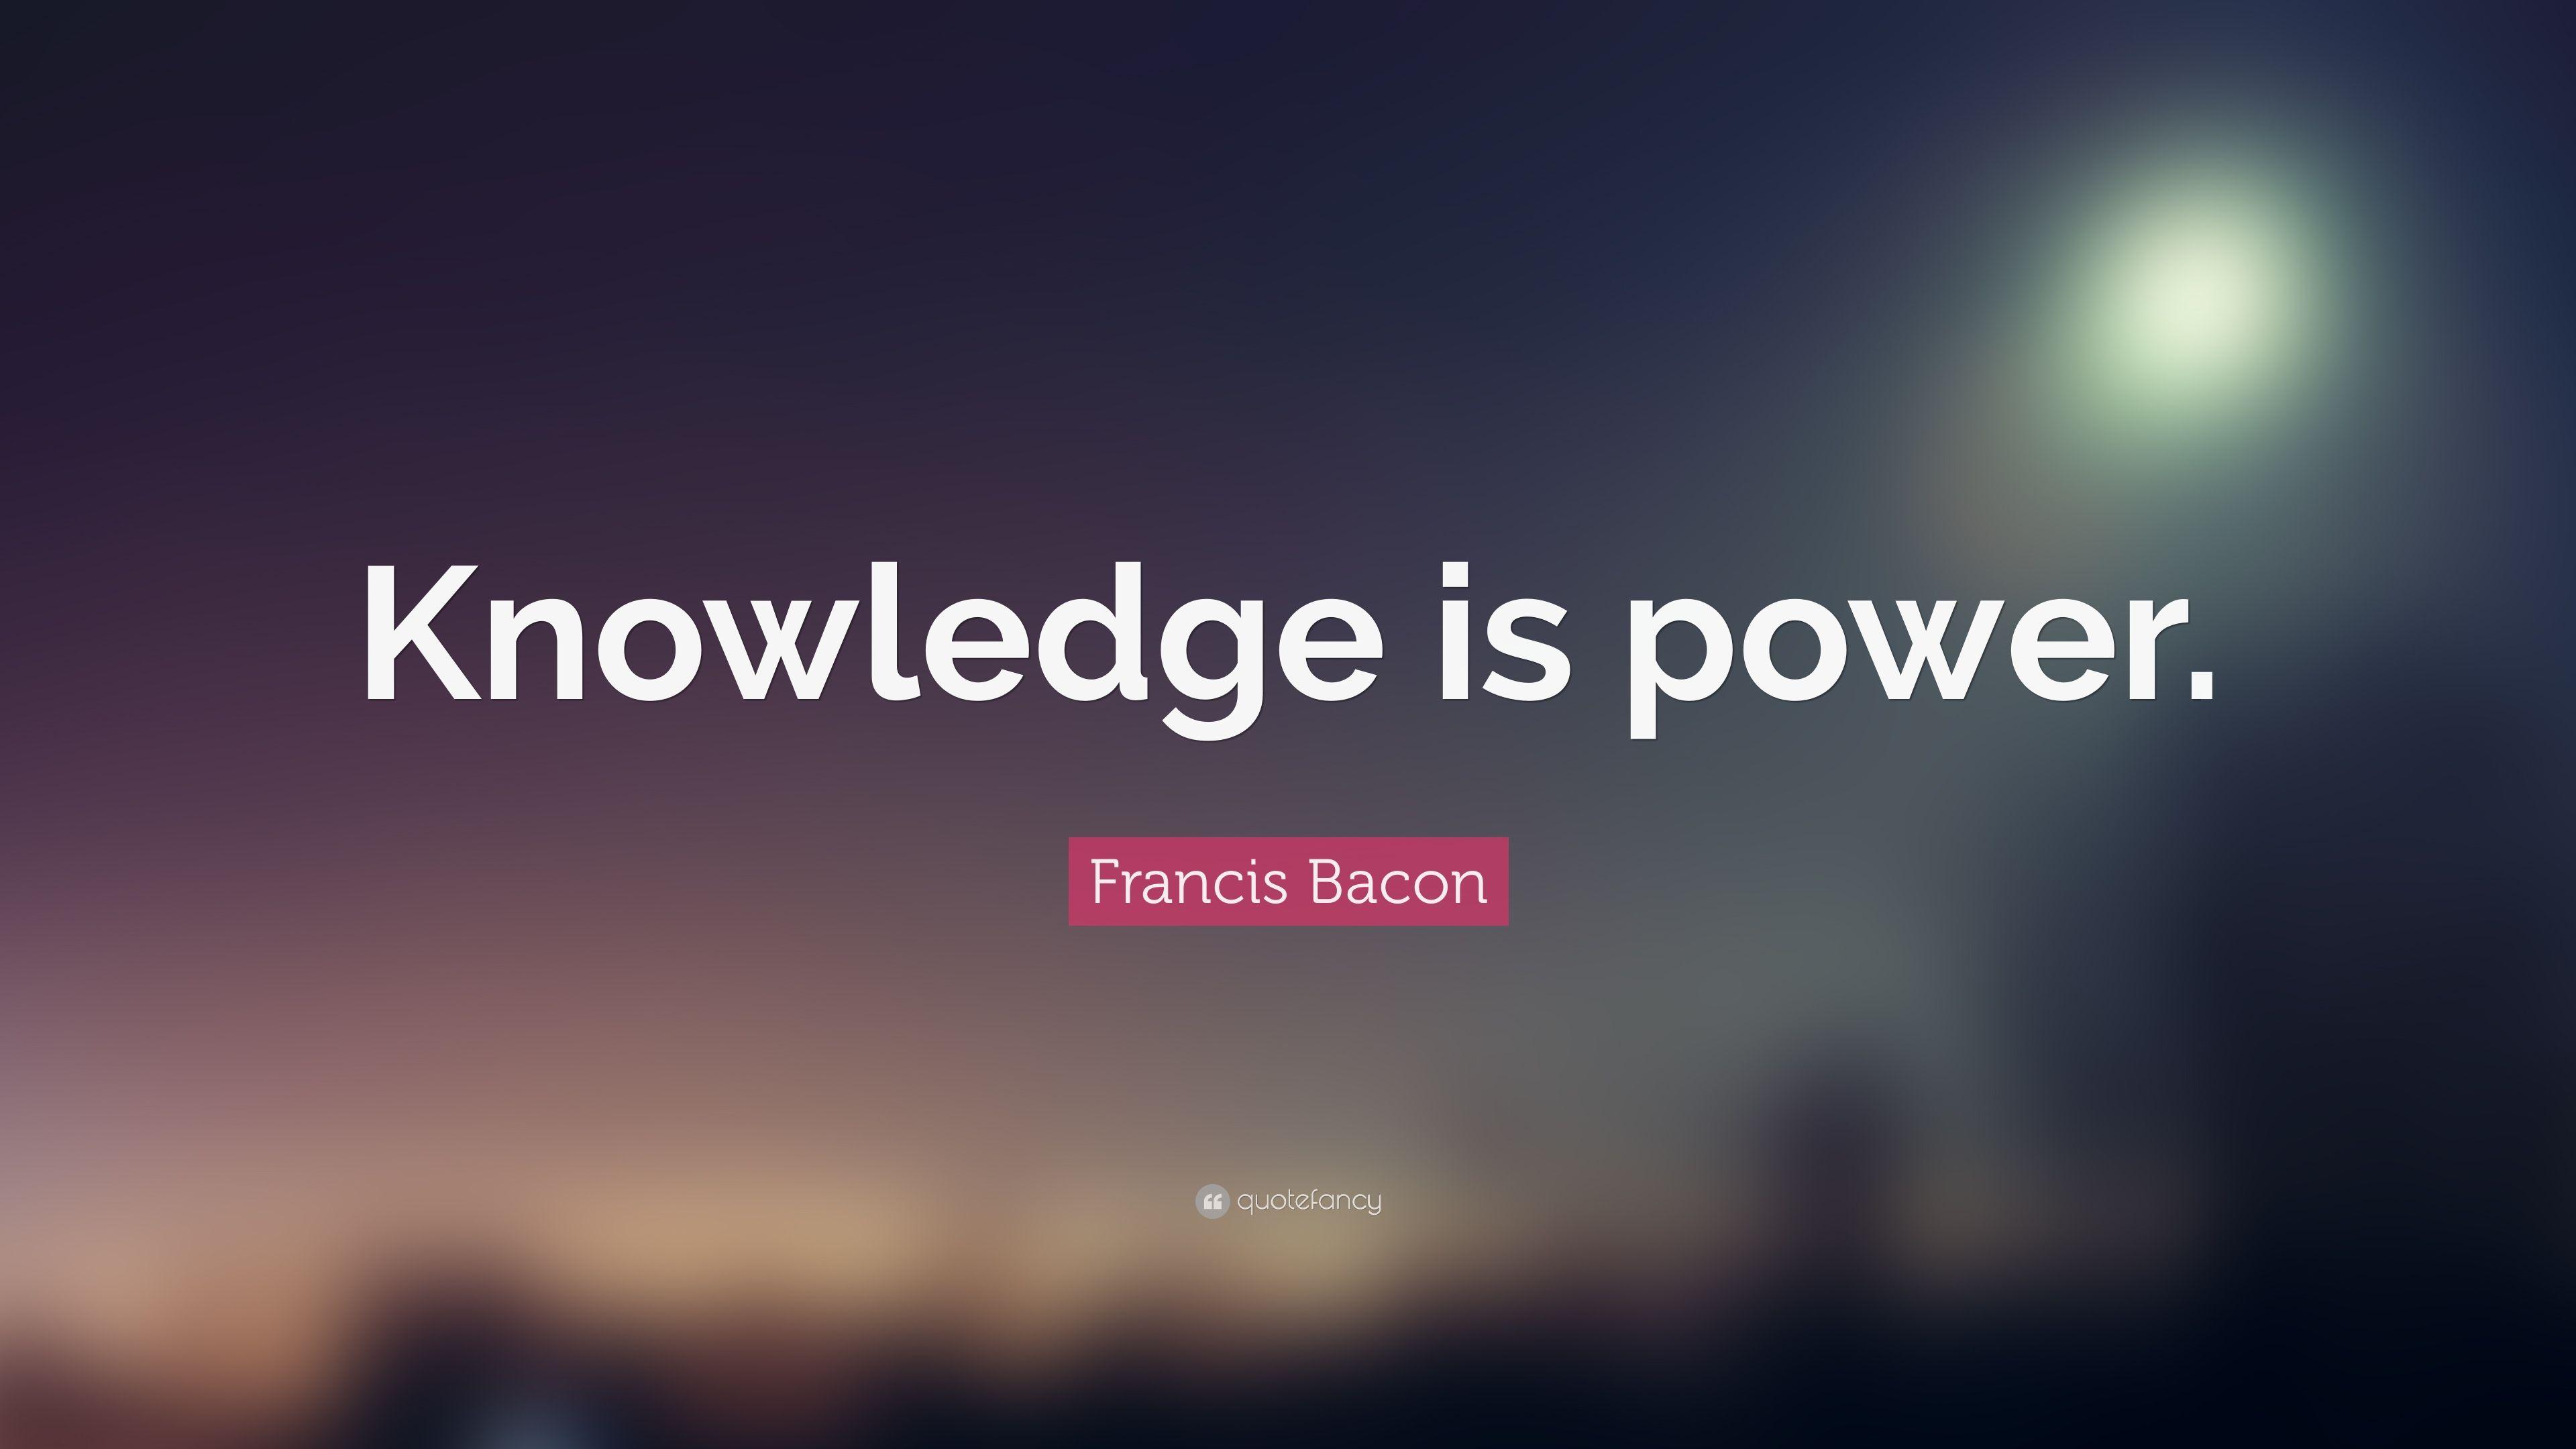 Francis Bacon Quote: “Knowledge is power.” 22 wallpaper